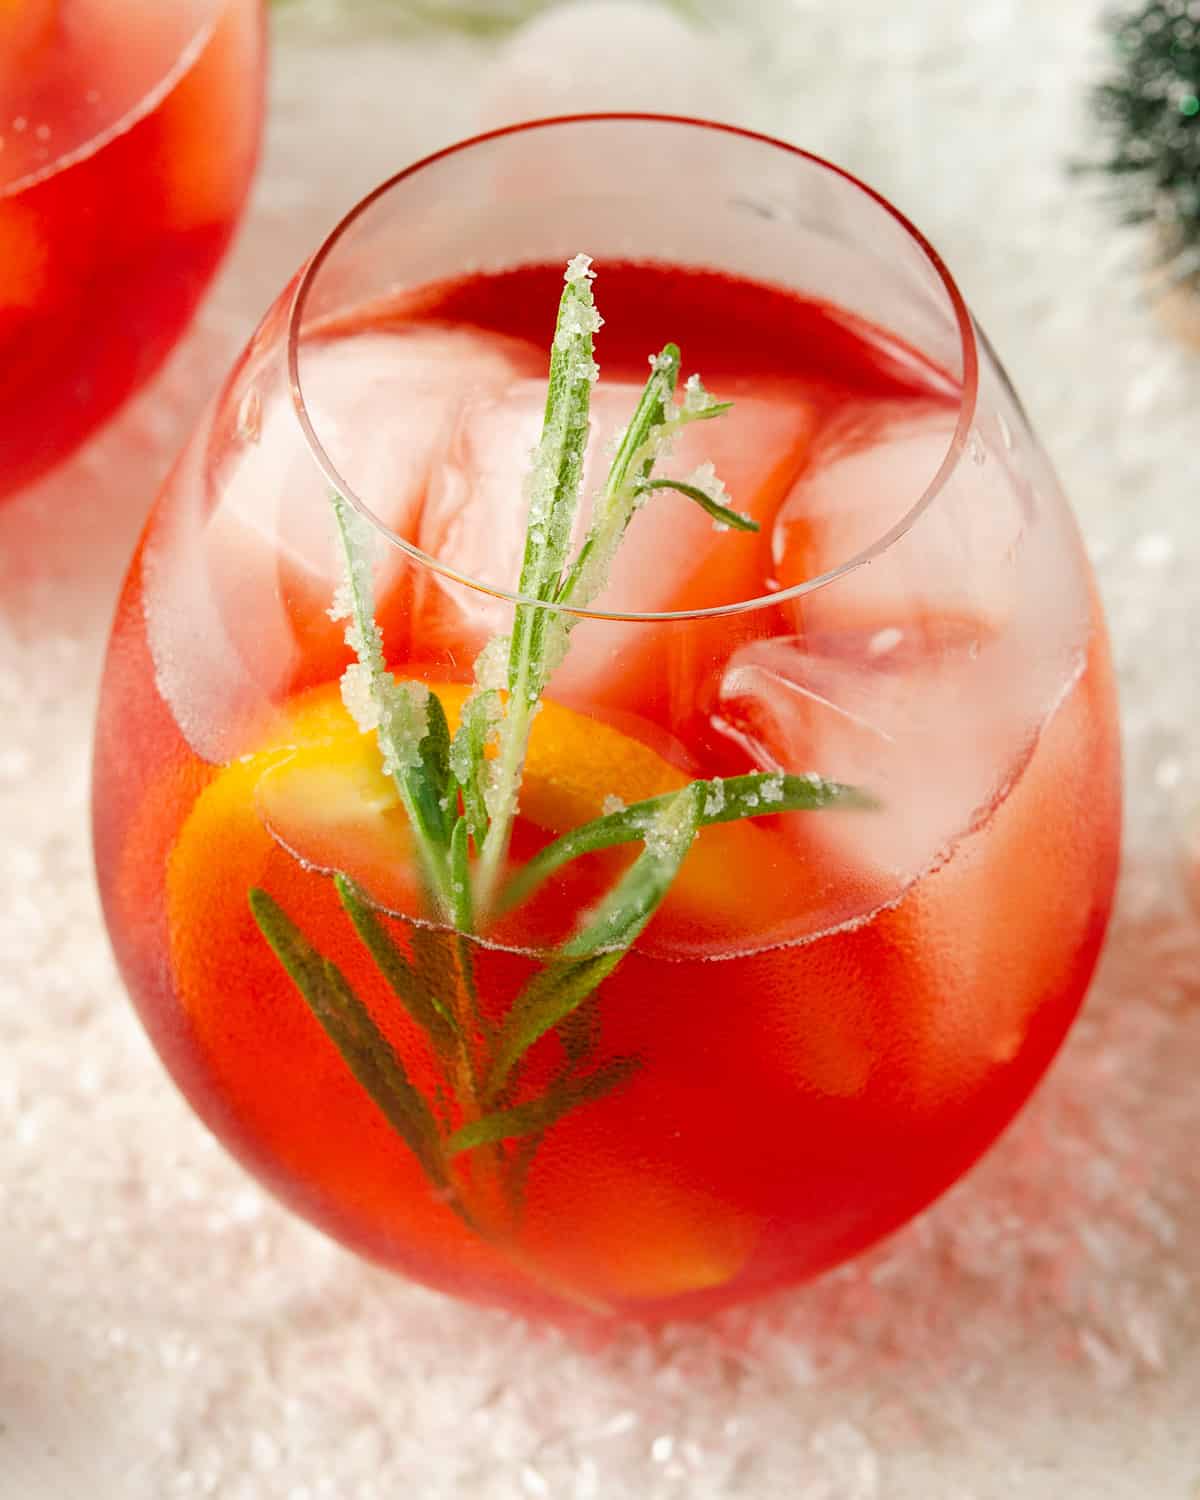 A close up of a sugared rosemary leaf in a Winter Aperol cocktail.